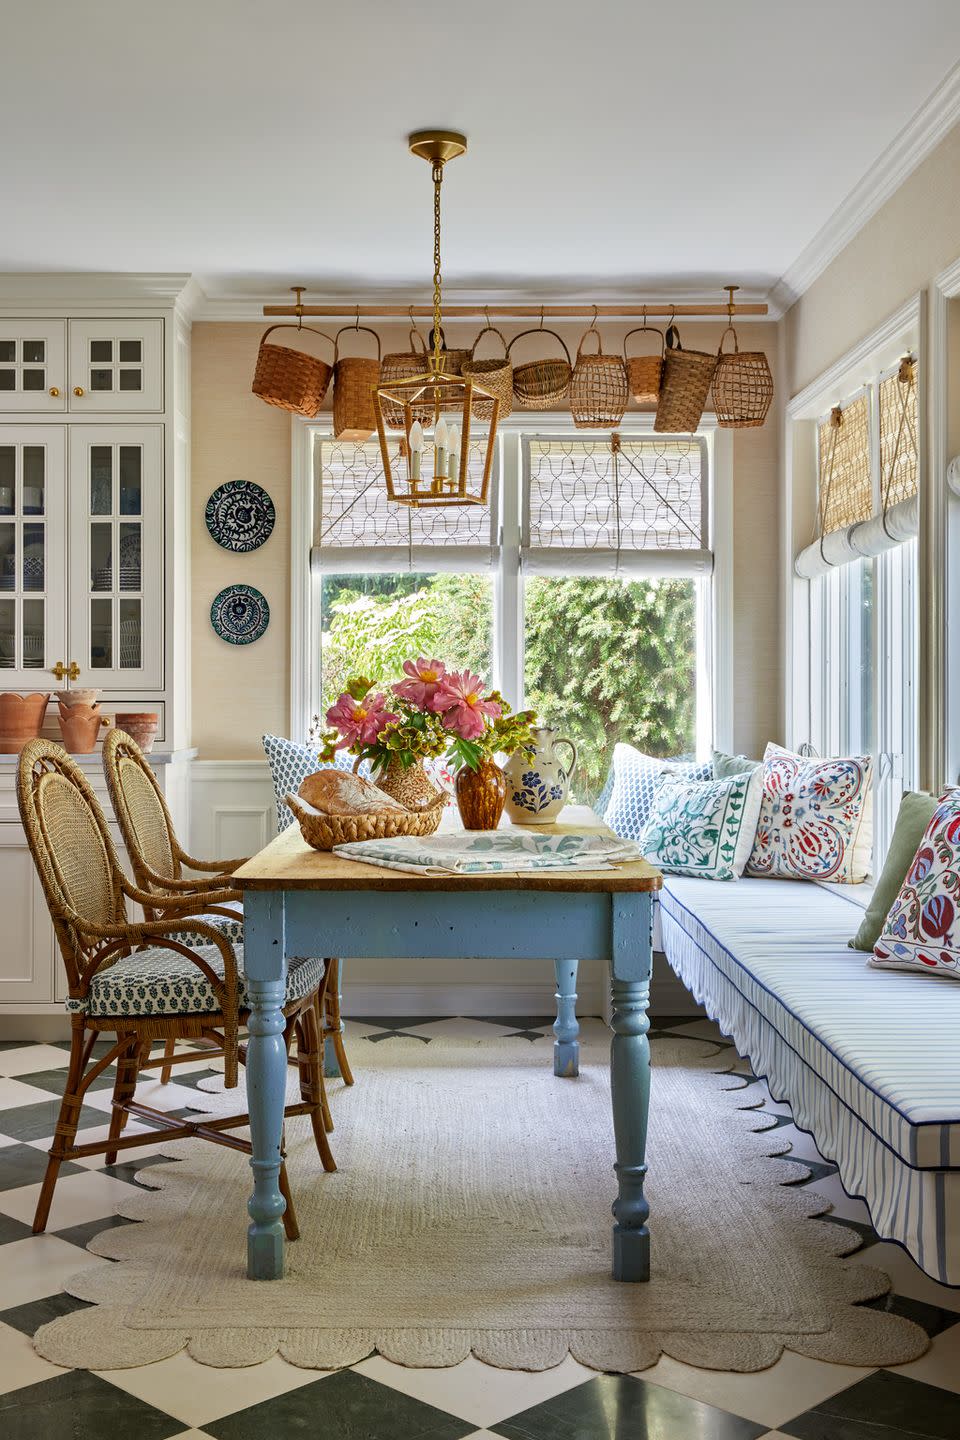 breakfast nook in kitchen of country home with baskets hanging from the ceiling